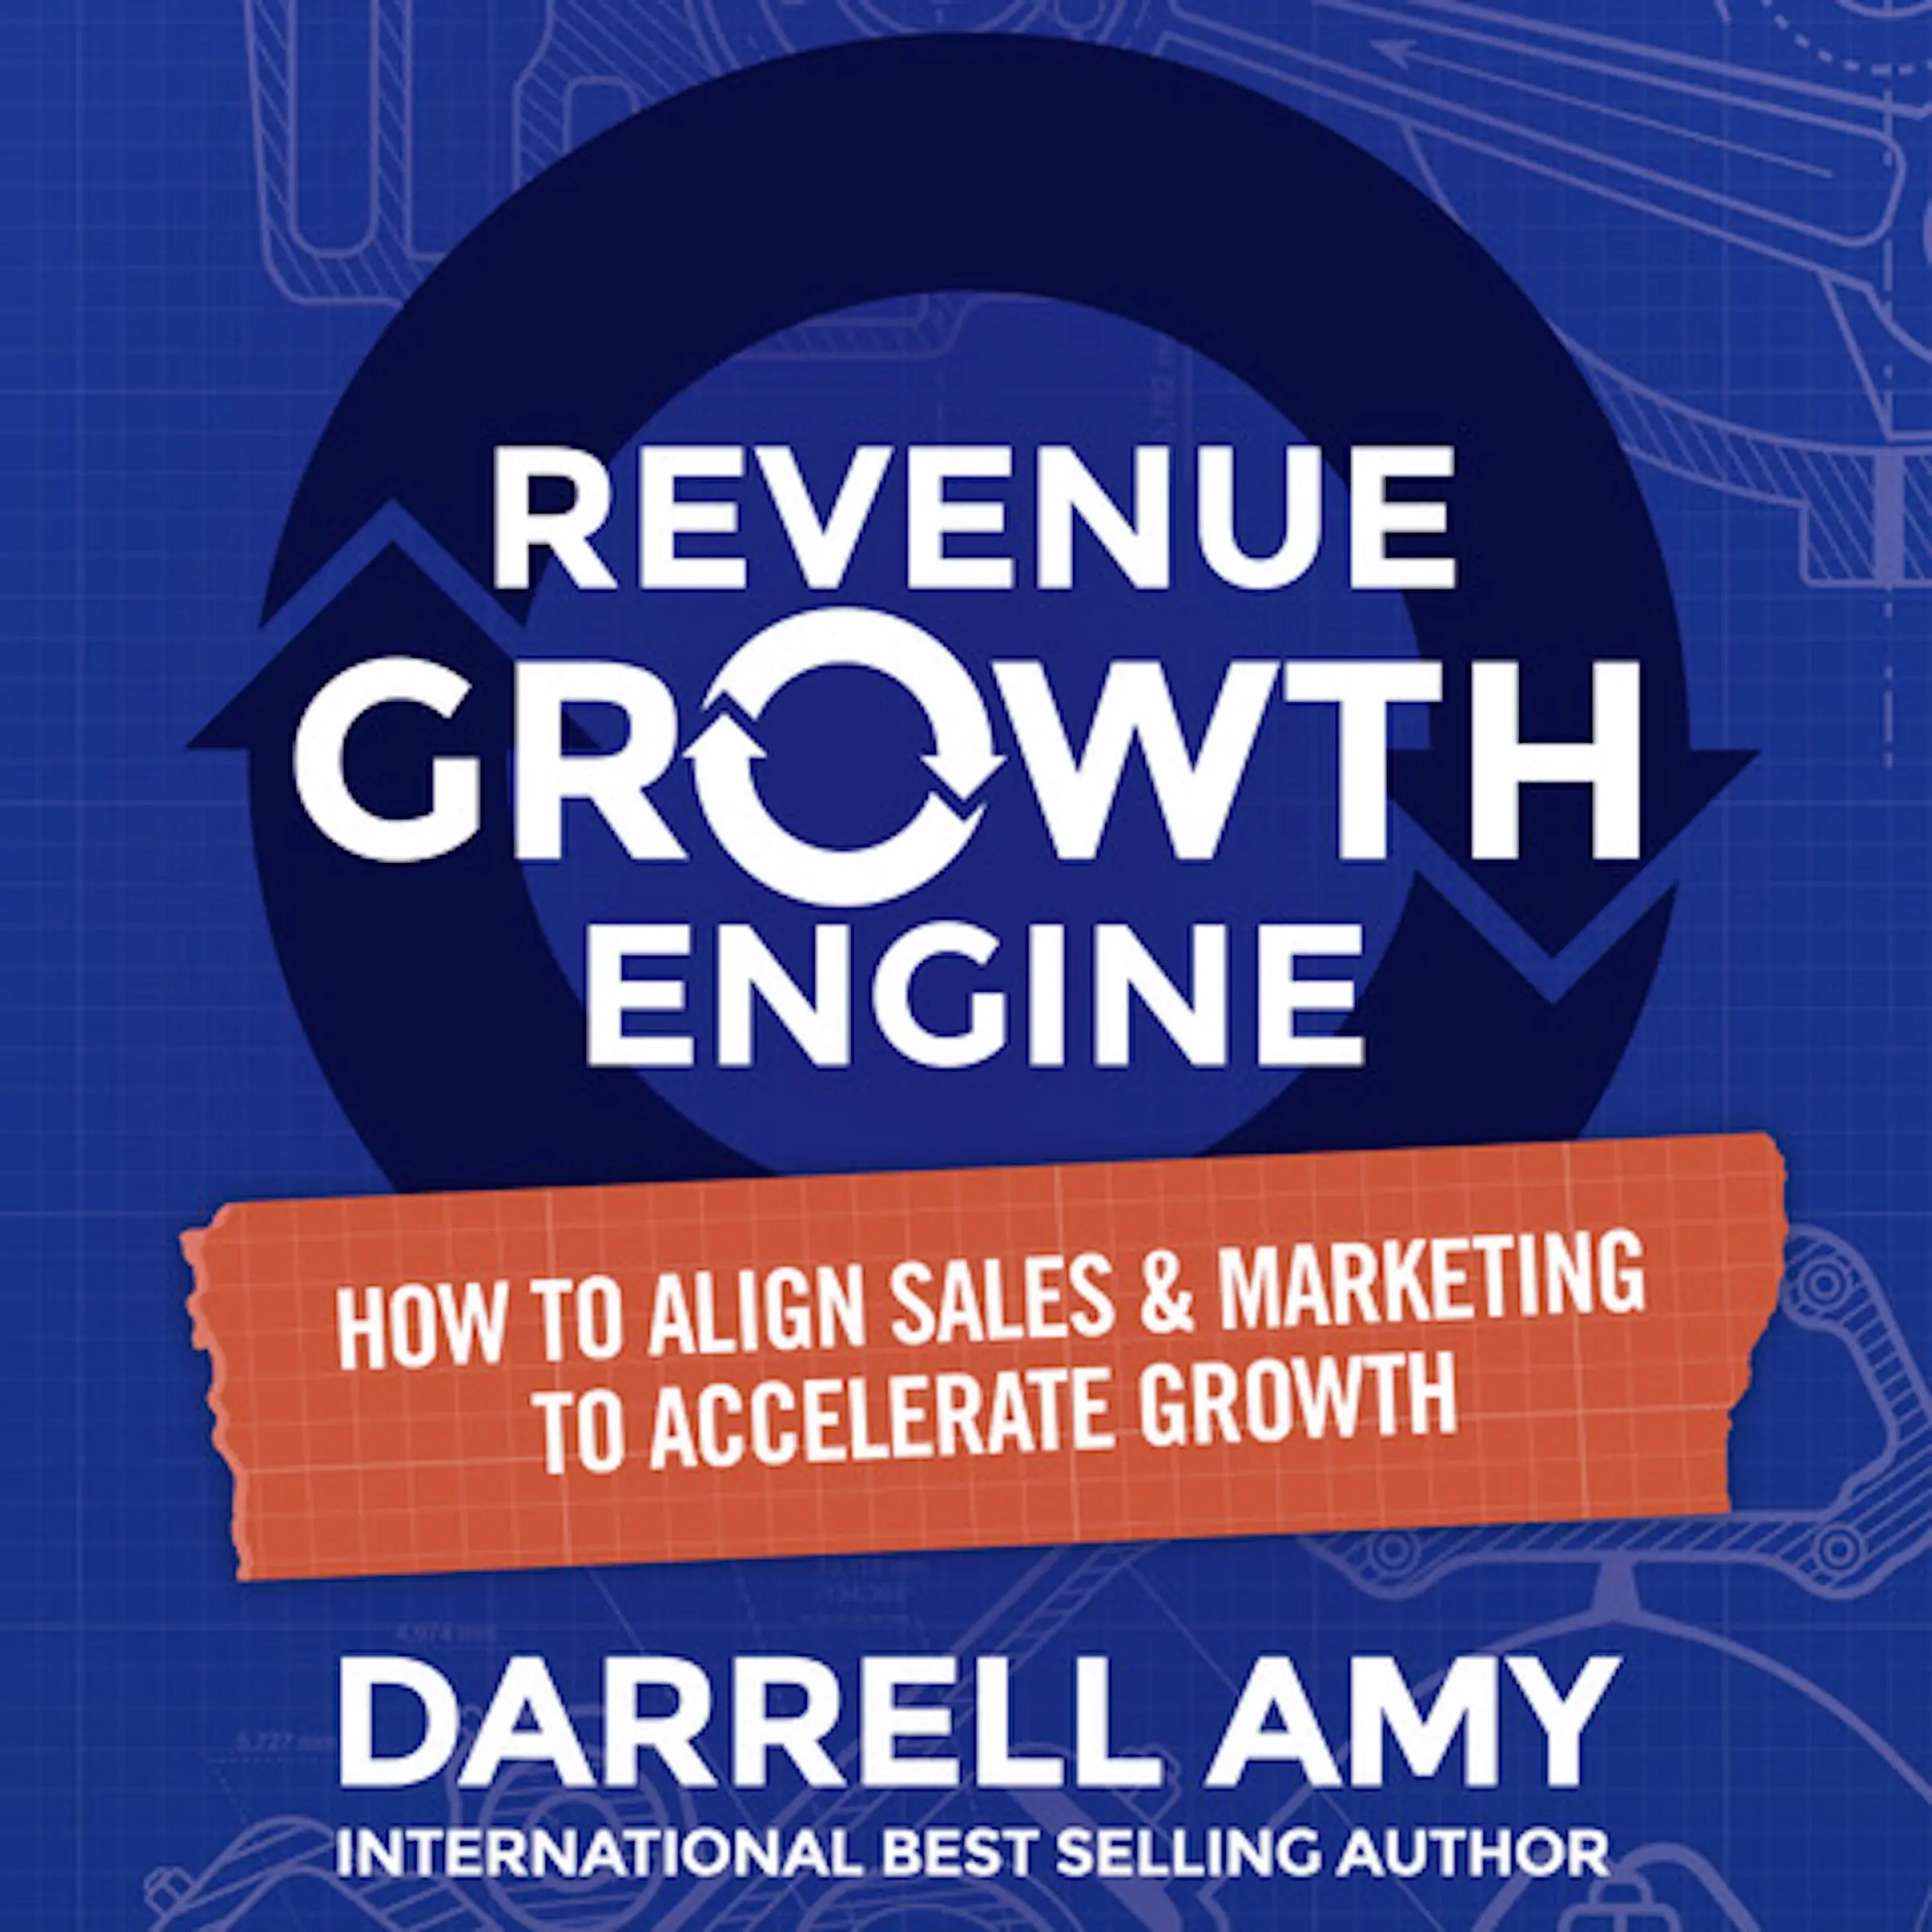 Revenue Growth Engine Audiobook by Darrell Amy